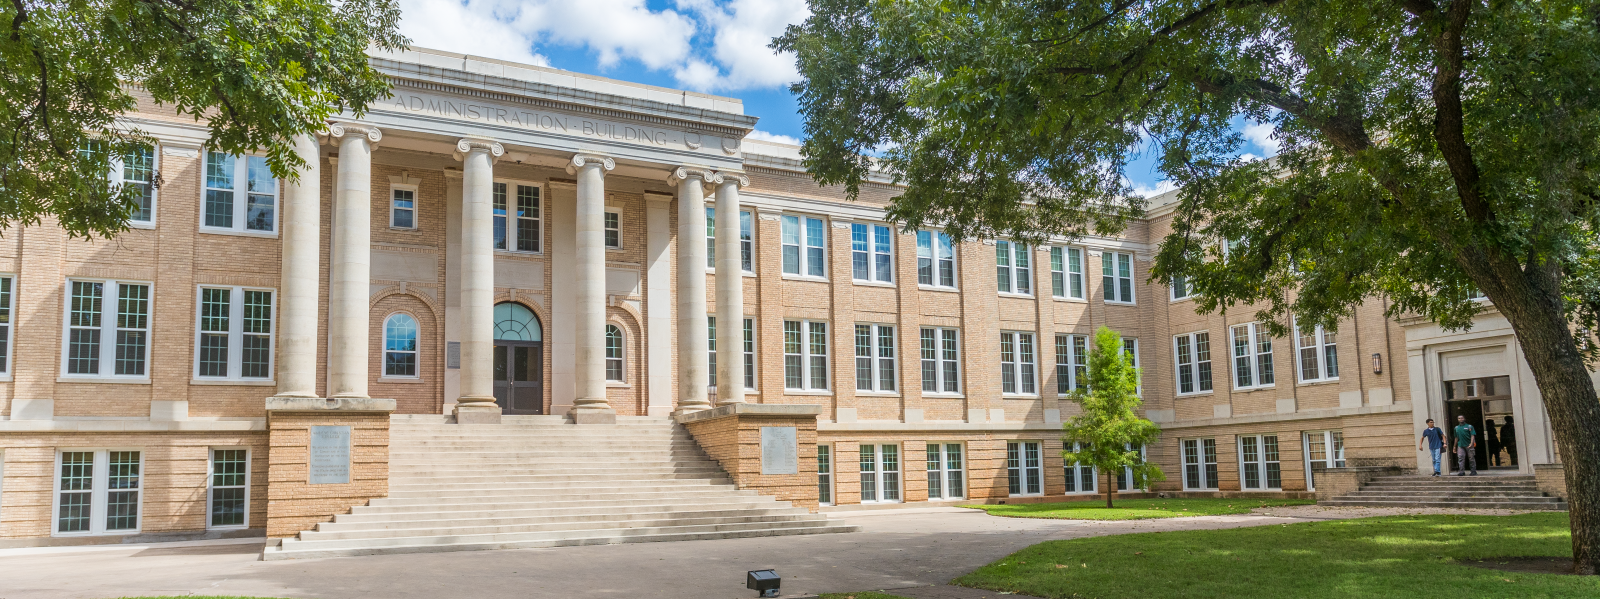 ACU's Hardin Building - PoliSci Department In the News - Newsletters